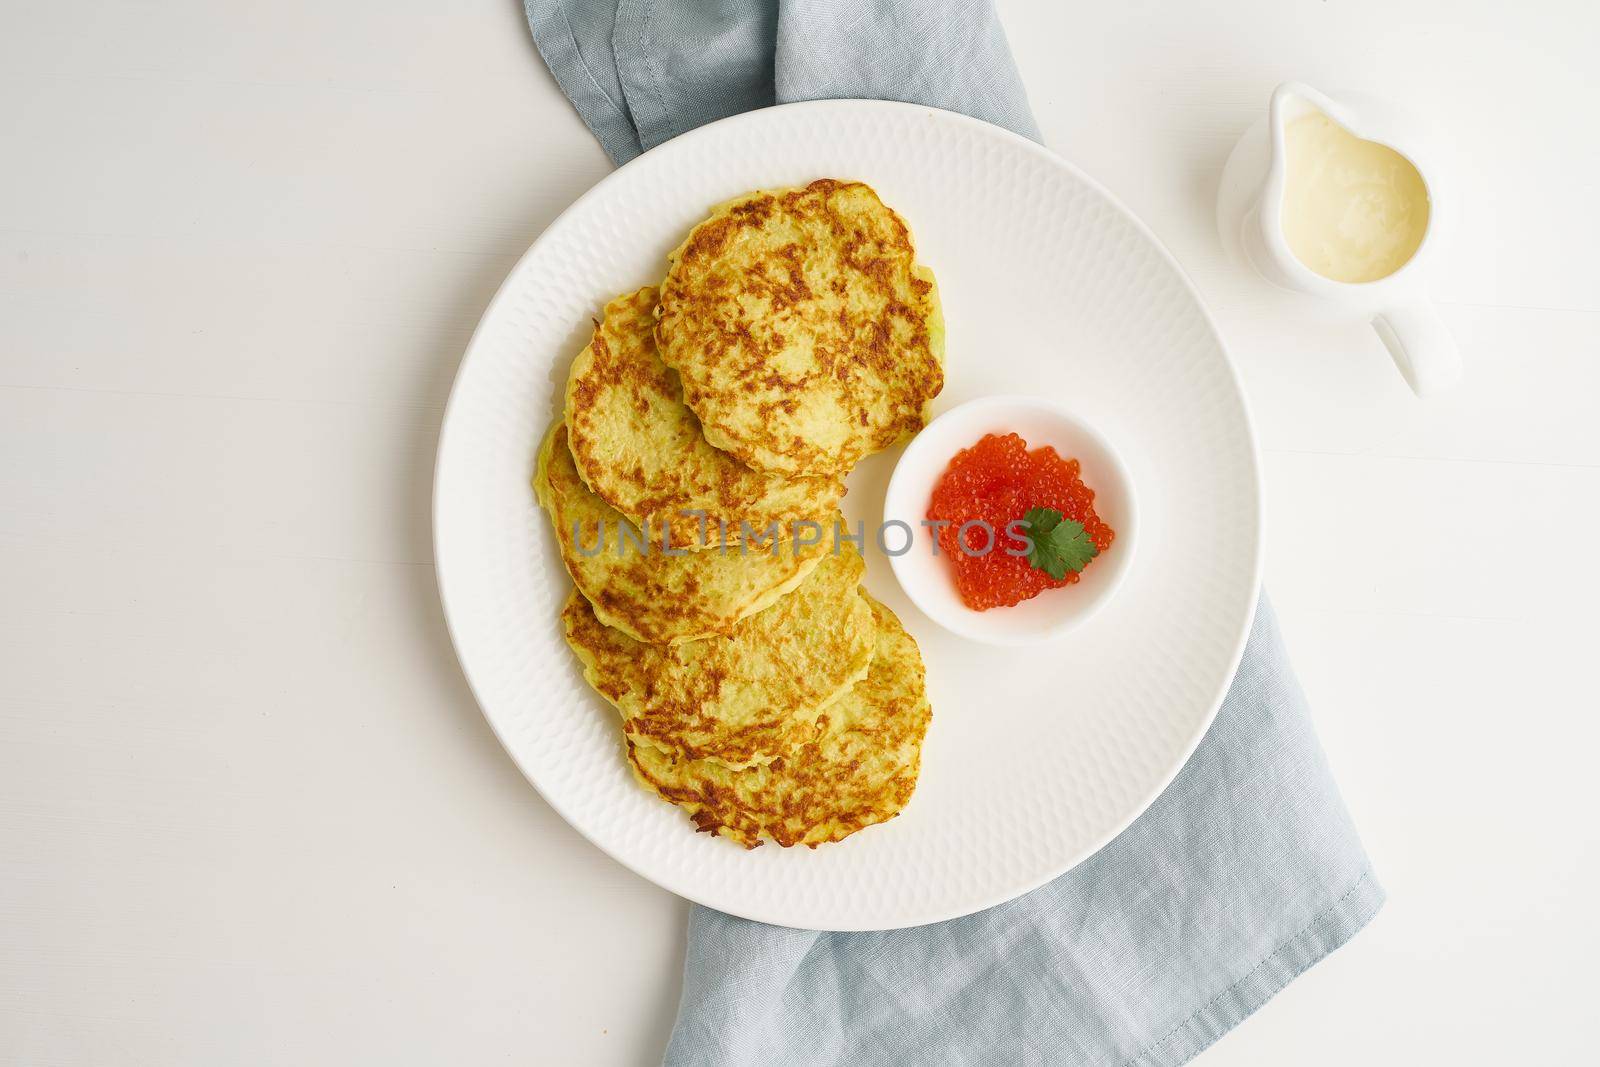 Zucchini pancakes with potato and red caviar, fodmap keto diet top view by NataBene